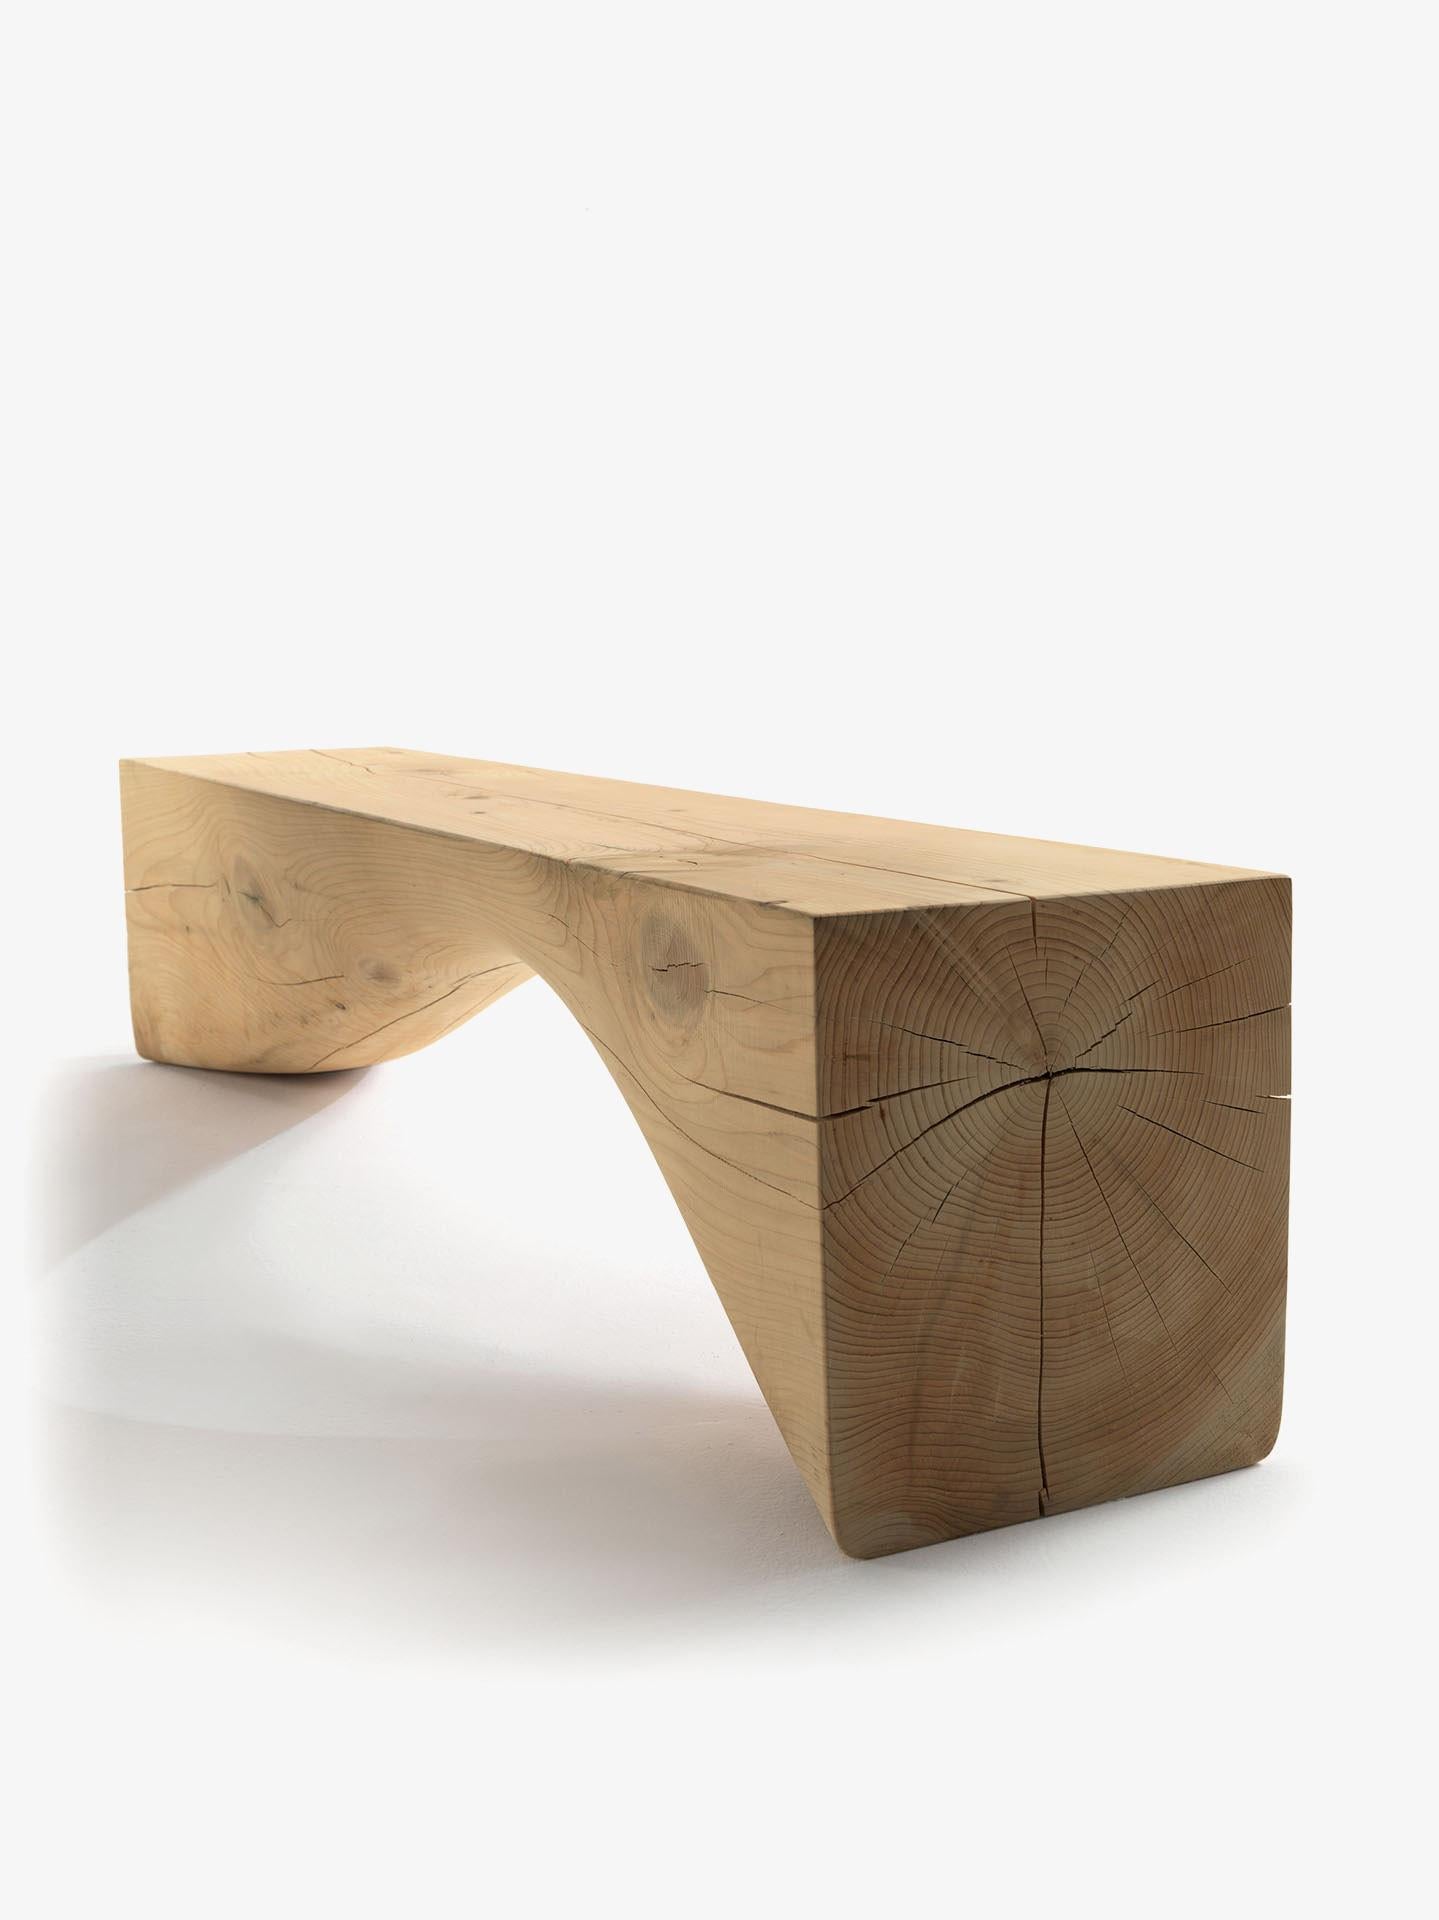 Bench in a single block of scented cedar. Distinguished by its arched shape below the seat that exalts the wood grains and the shades of the natural cedar.